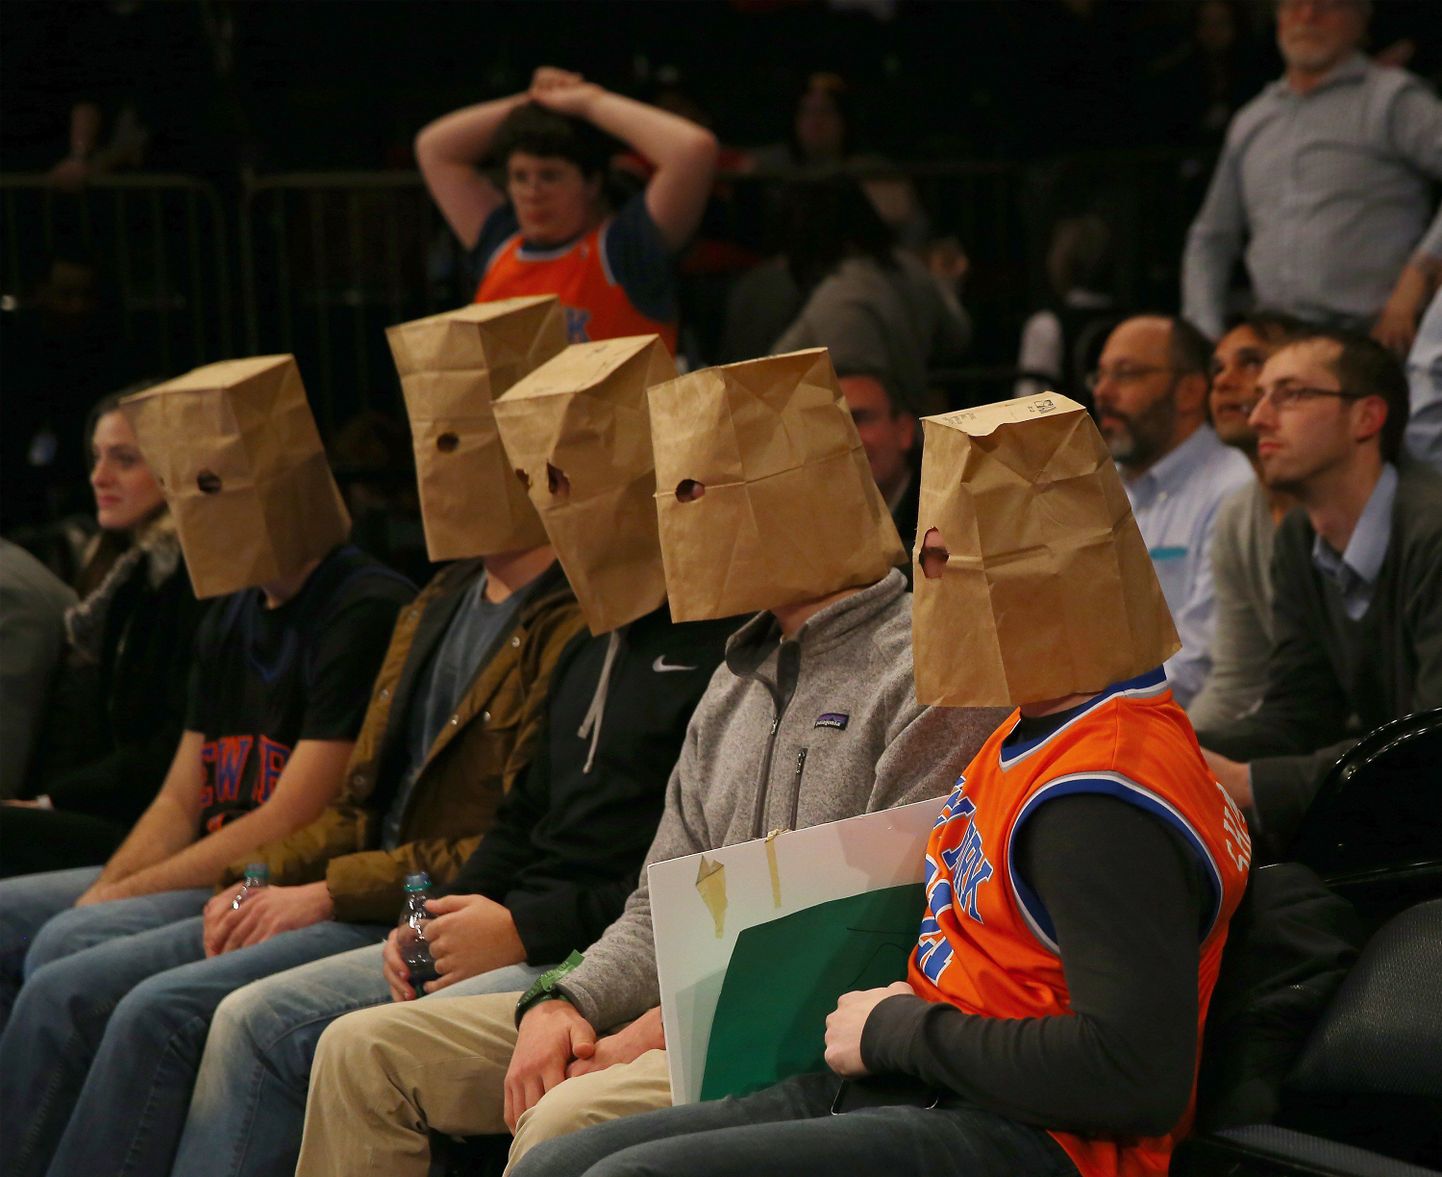 NEW YORK, NY - JANUARY 08: New York Knicks fans wear bags over their heads and react as the New York Knicks lose at Madison Square Garden on January 8, 2015 in New York City.The Houston Rockets defeated the New York Knicks 120-96. NOTE TO USER: User expressly acknowledges and agrees that, by downloading and/or using this photograph, user is consenting to the terms and conditions of the Getty Images License Agreement.   Elsa/Getty Images/AFP
== FOR NEWSPAPERS, INTERNET, TELCOS & TELEVISION USE ONLY ==